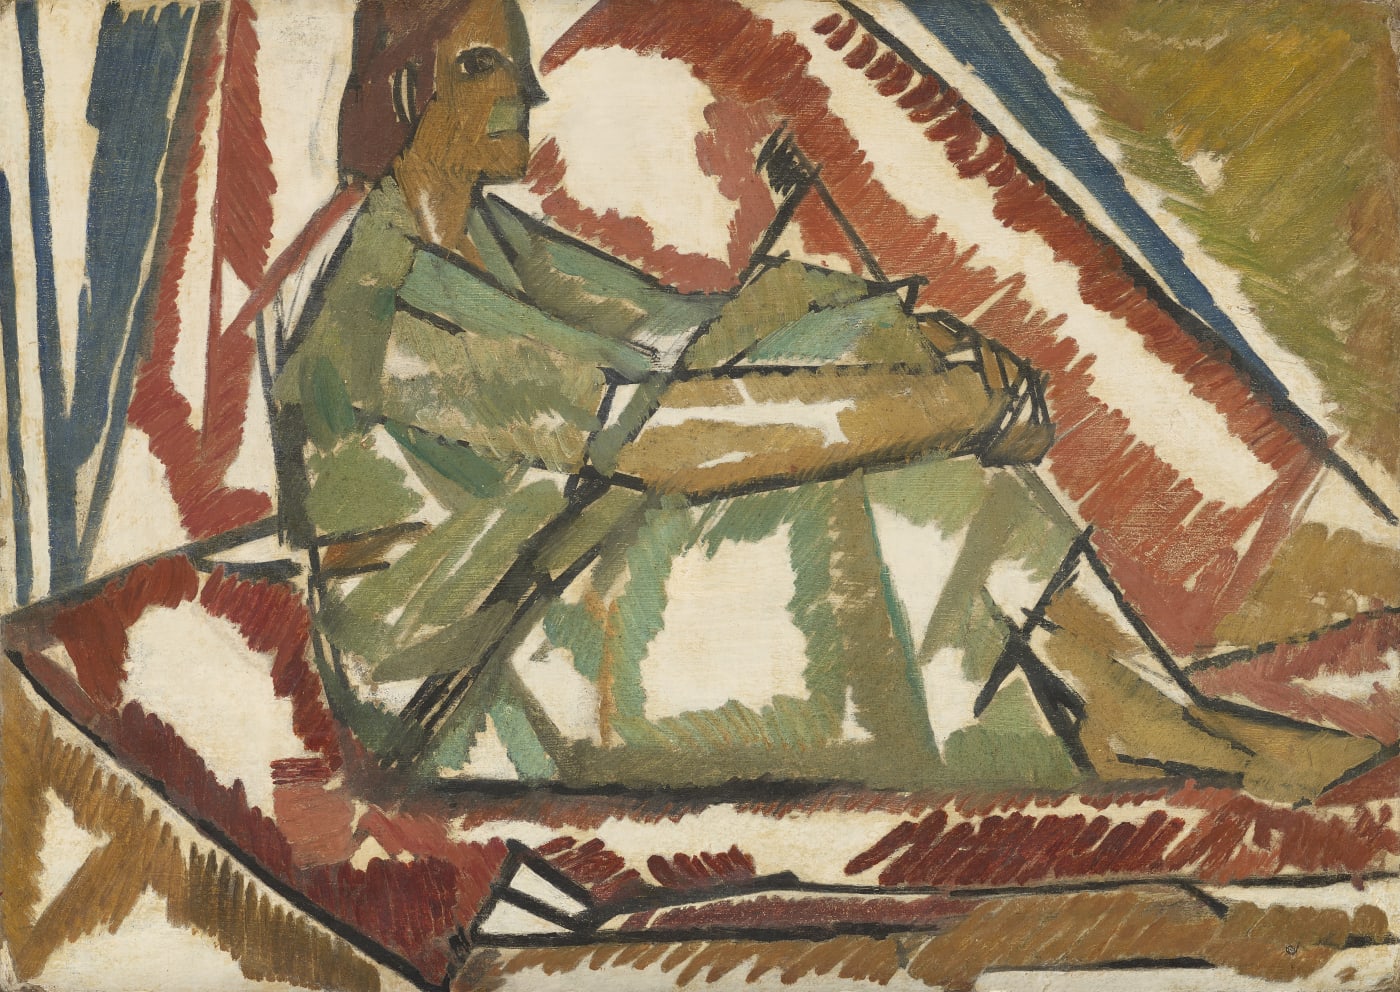 a seated figure by Vanessa Bell. a figure sits side profile to the viewer in red and green against an abstract background.